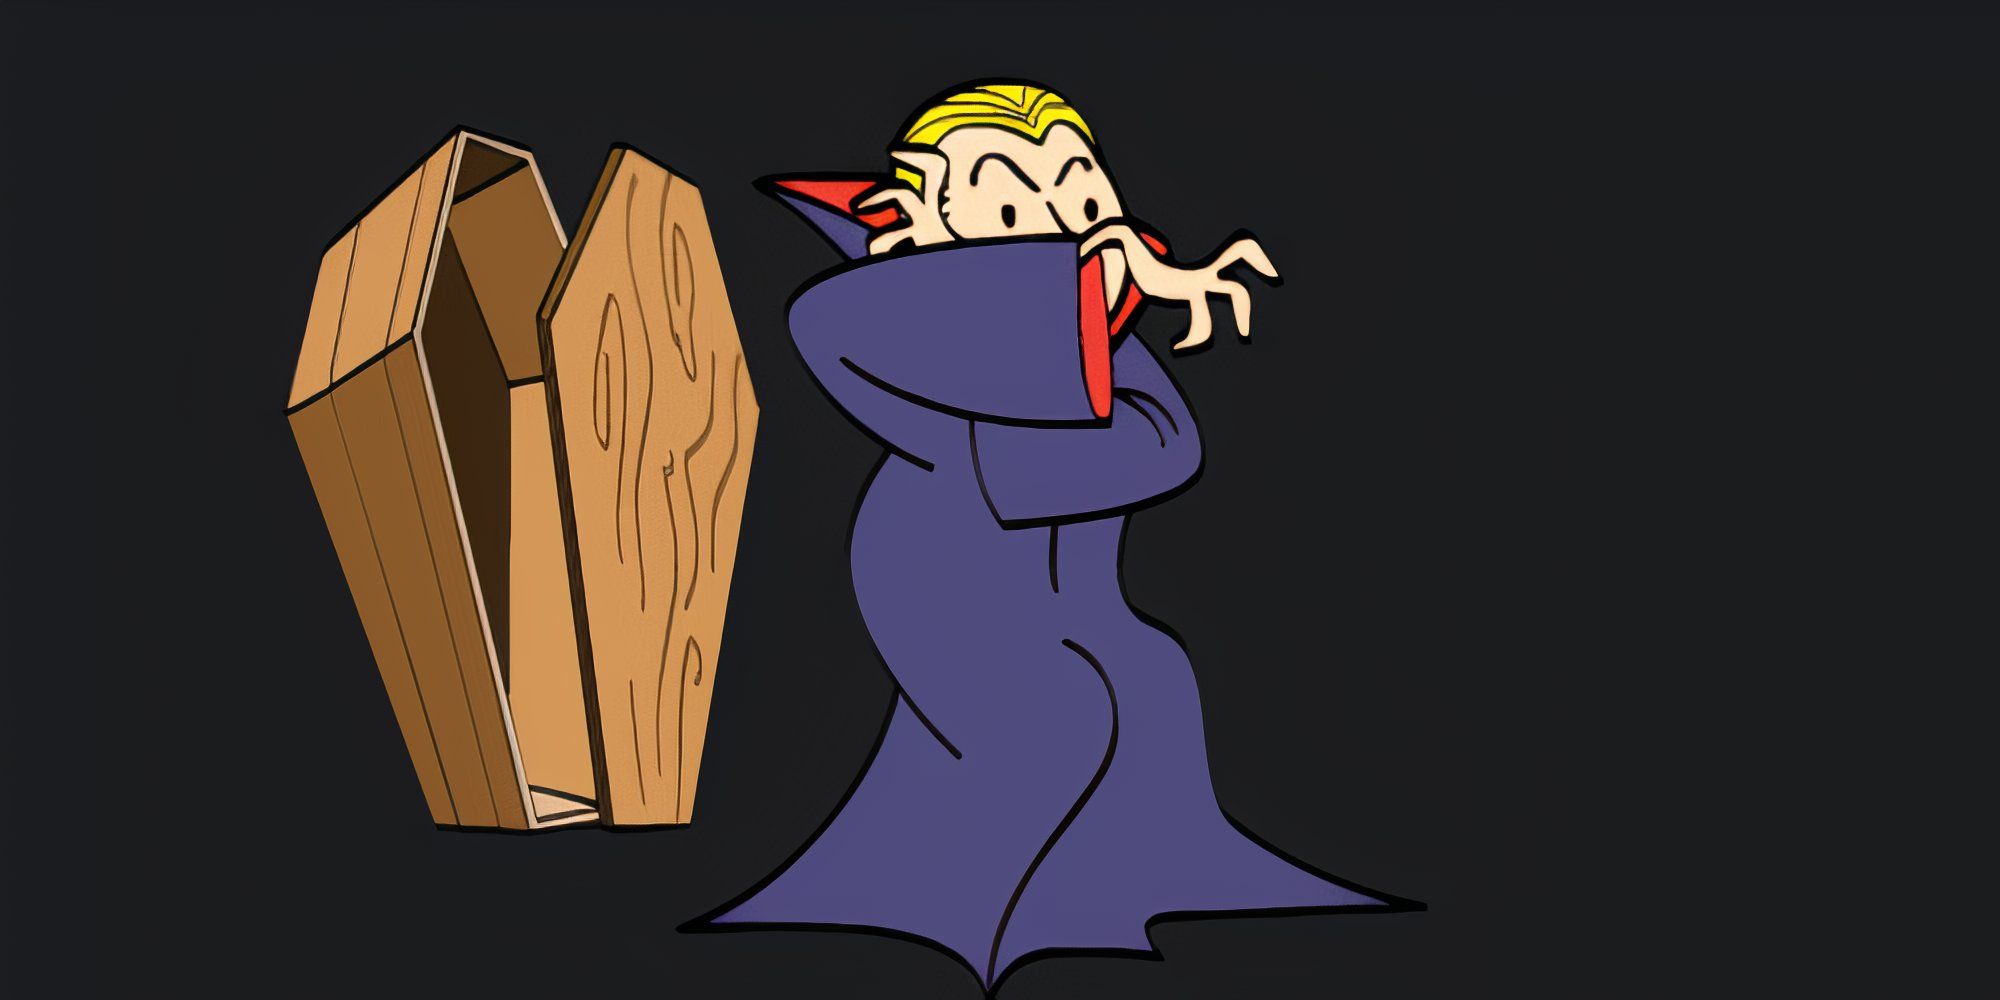 Vault Boy stands in front of a coffin while dressed like a vampire